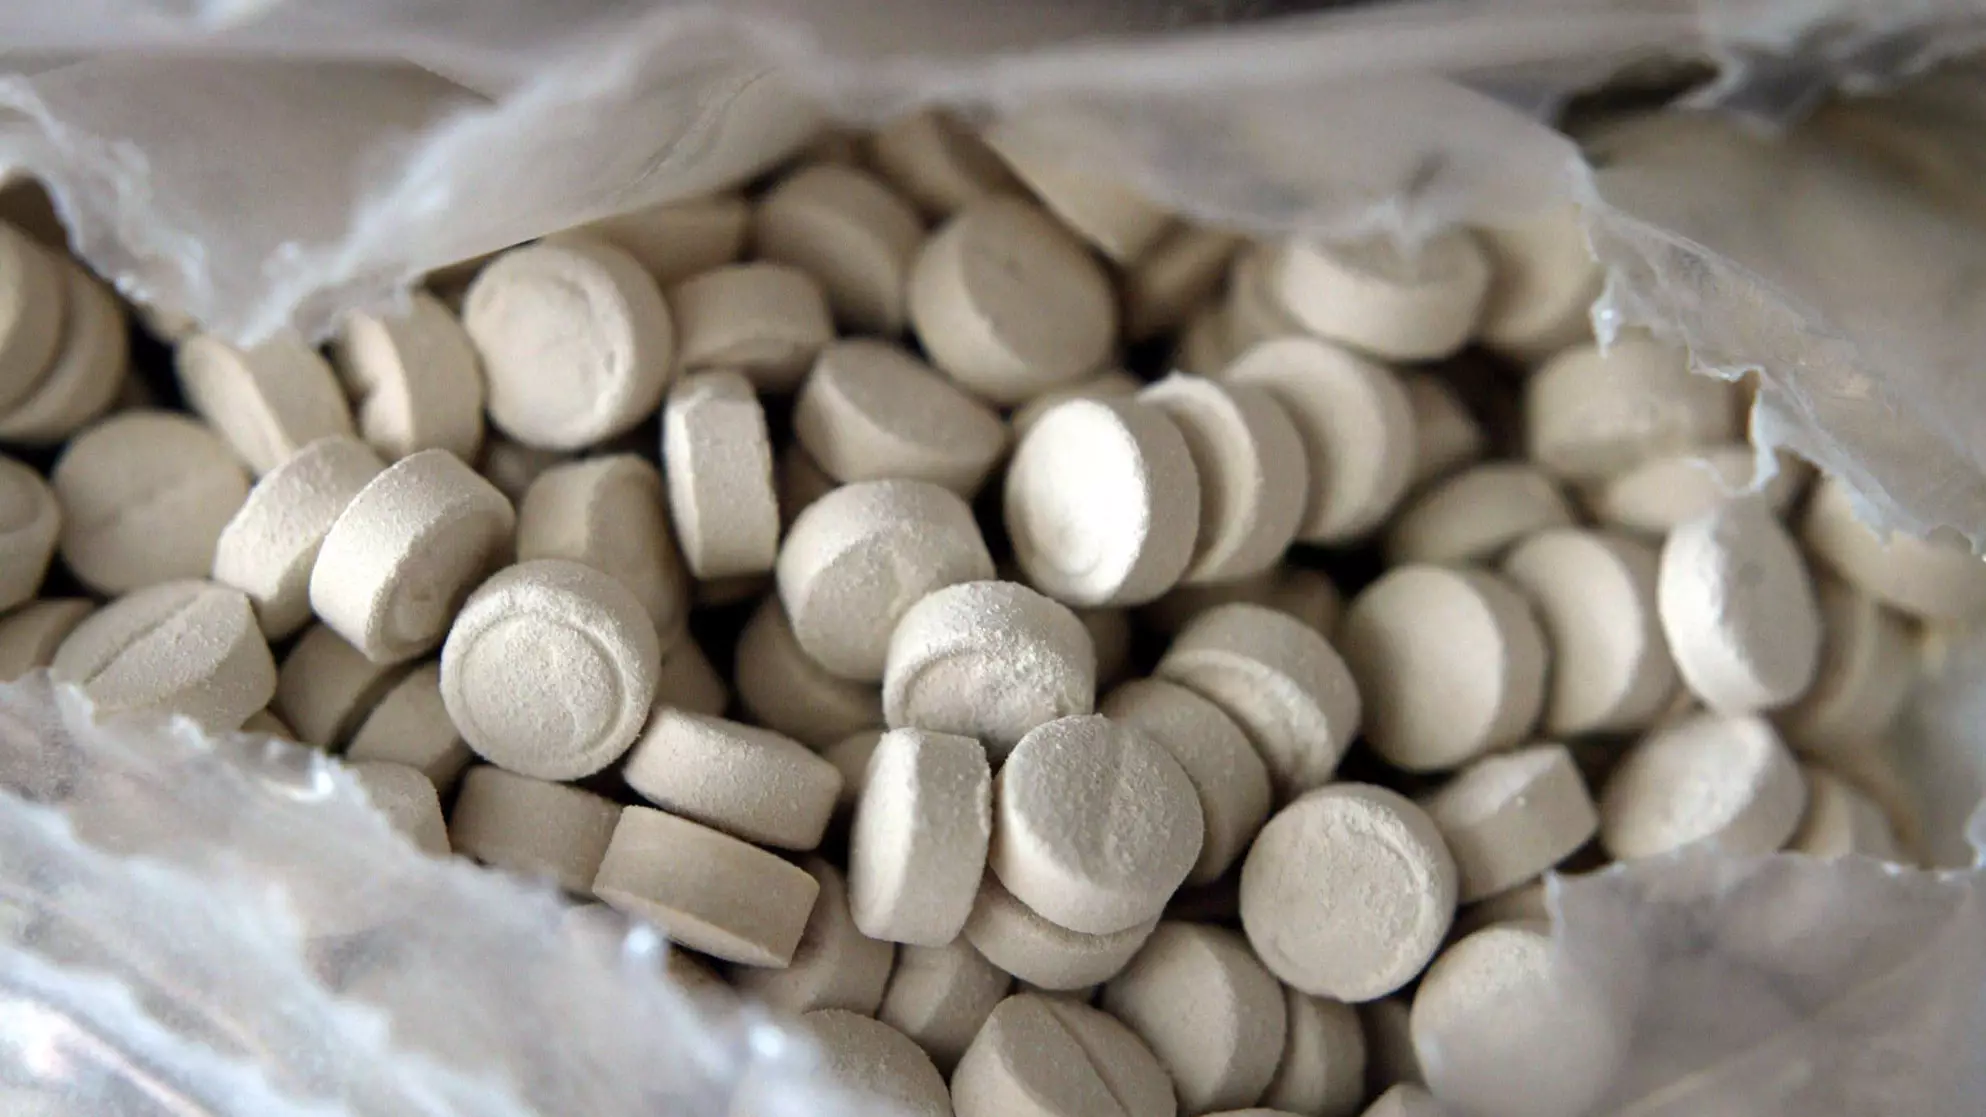 Science Professor Allegedly Got His Students To Brew Ecstasy In Class